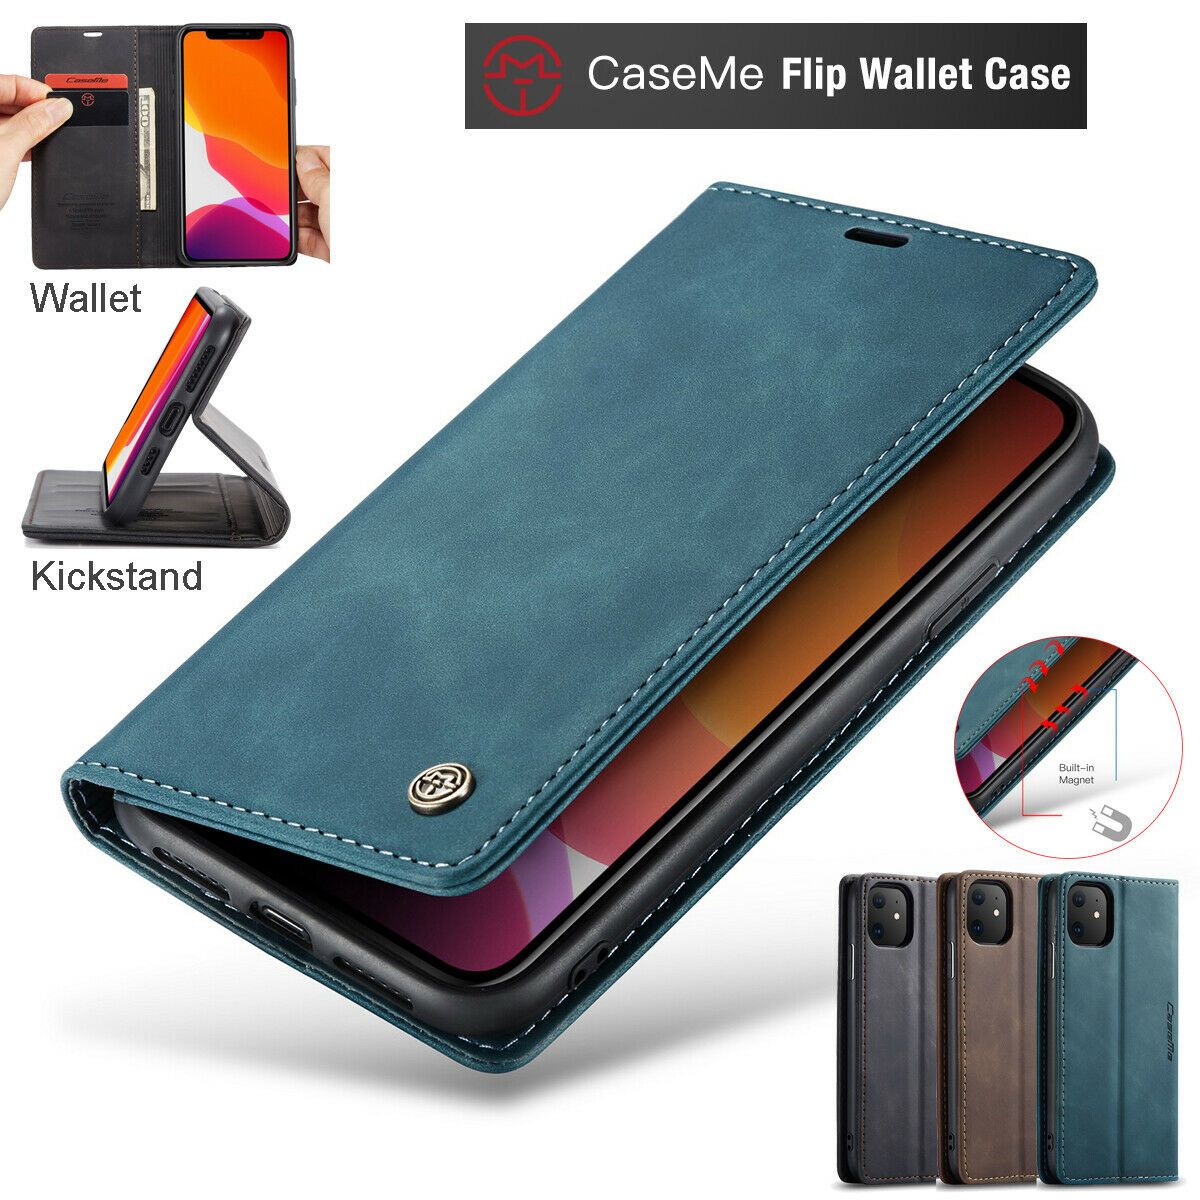 iPhone 11 Pro XS Max XR X 8 7 Plus Case Magnetic Leather Wallet Flip Stand Cover 2000eseller 